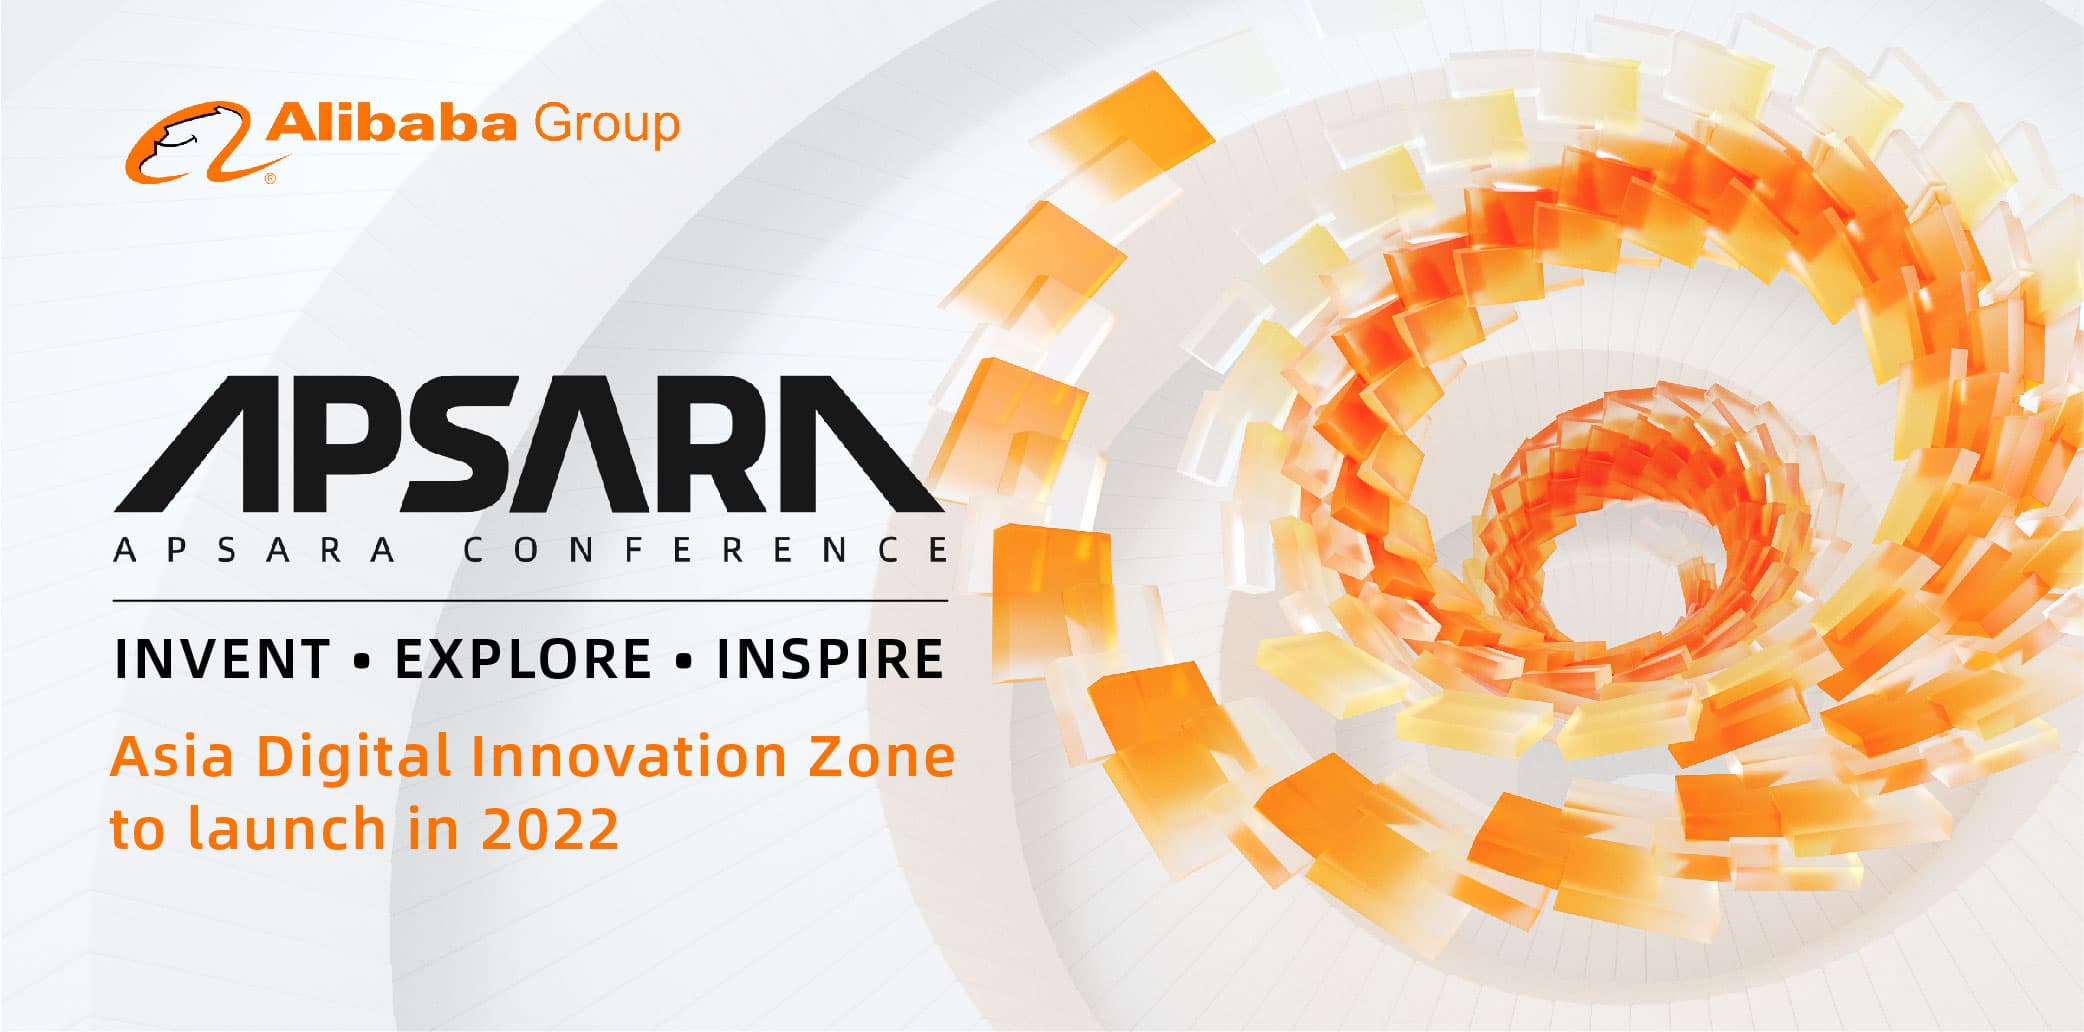 Alibaba Group to launch the Asia Digital Innovation Zone at Apsara Conference 2022